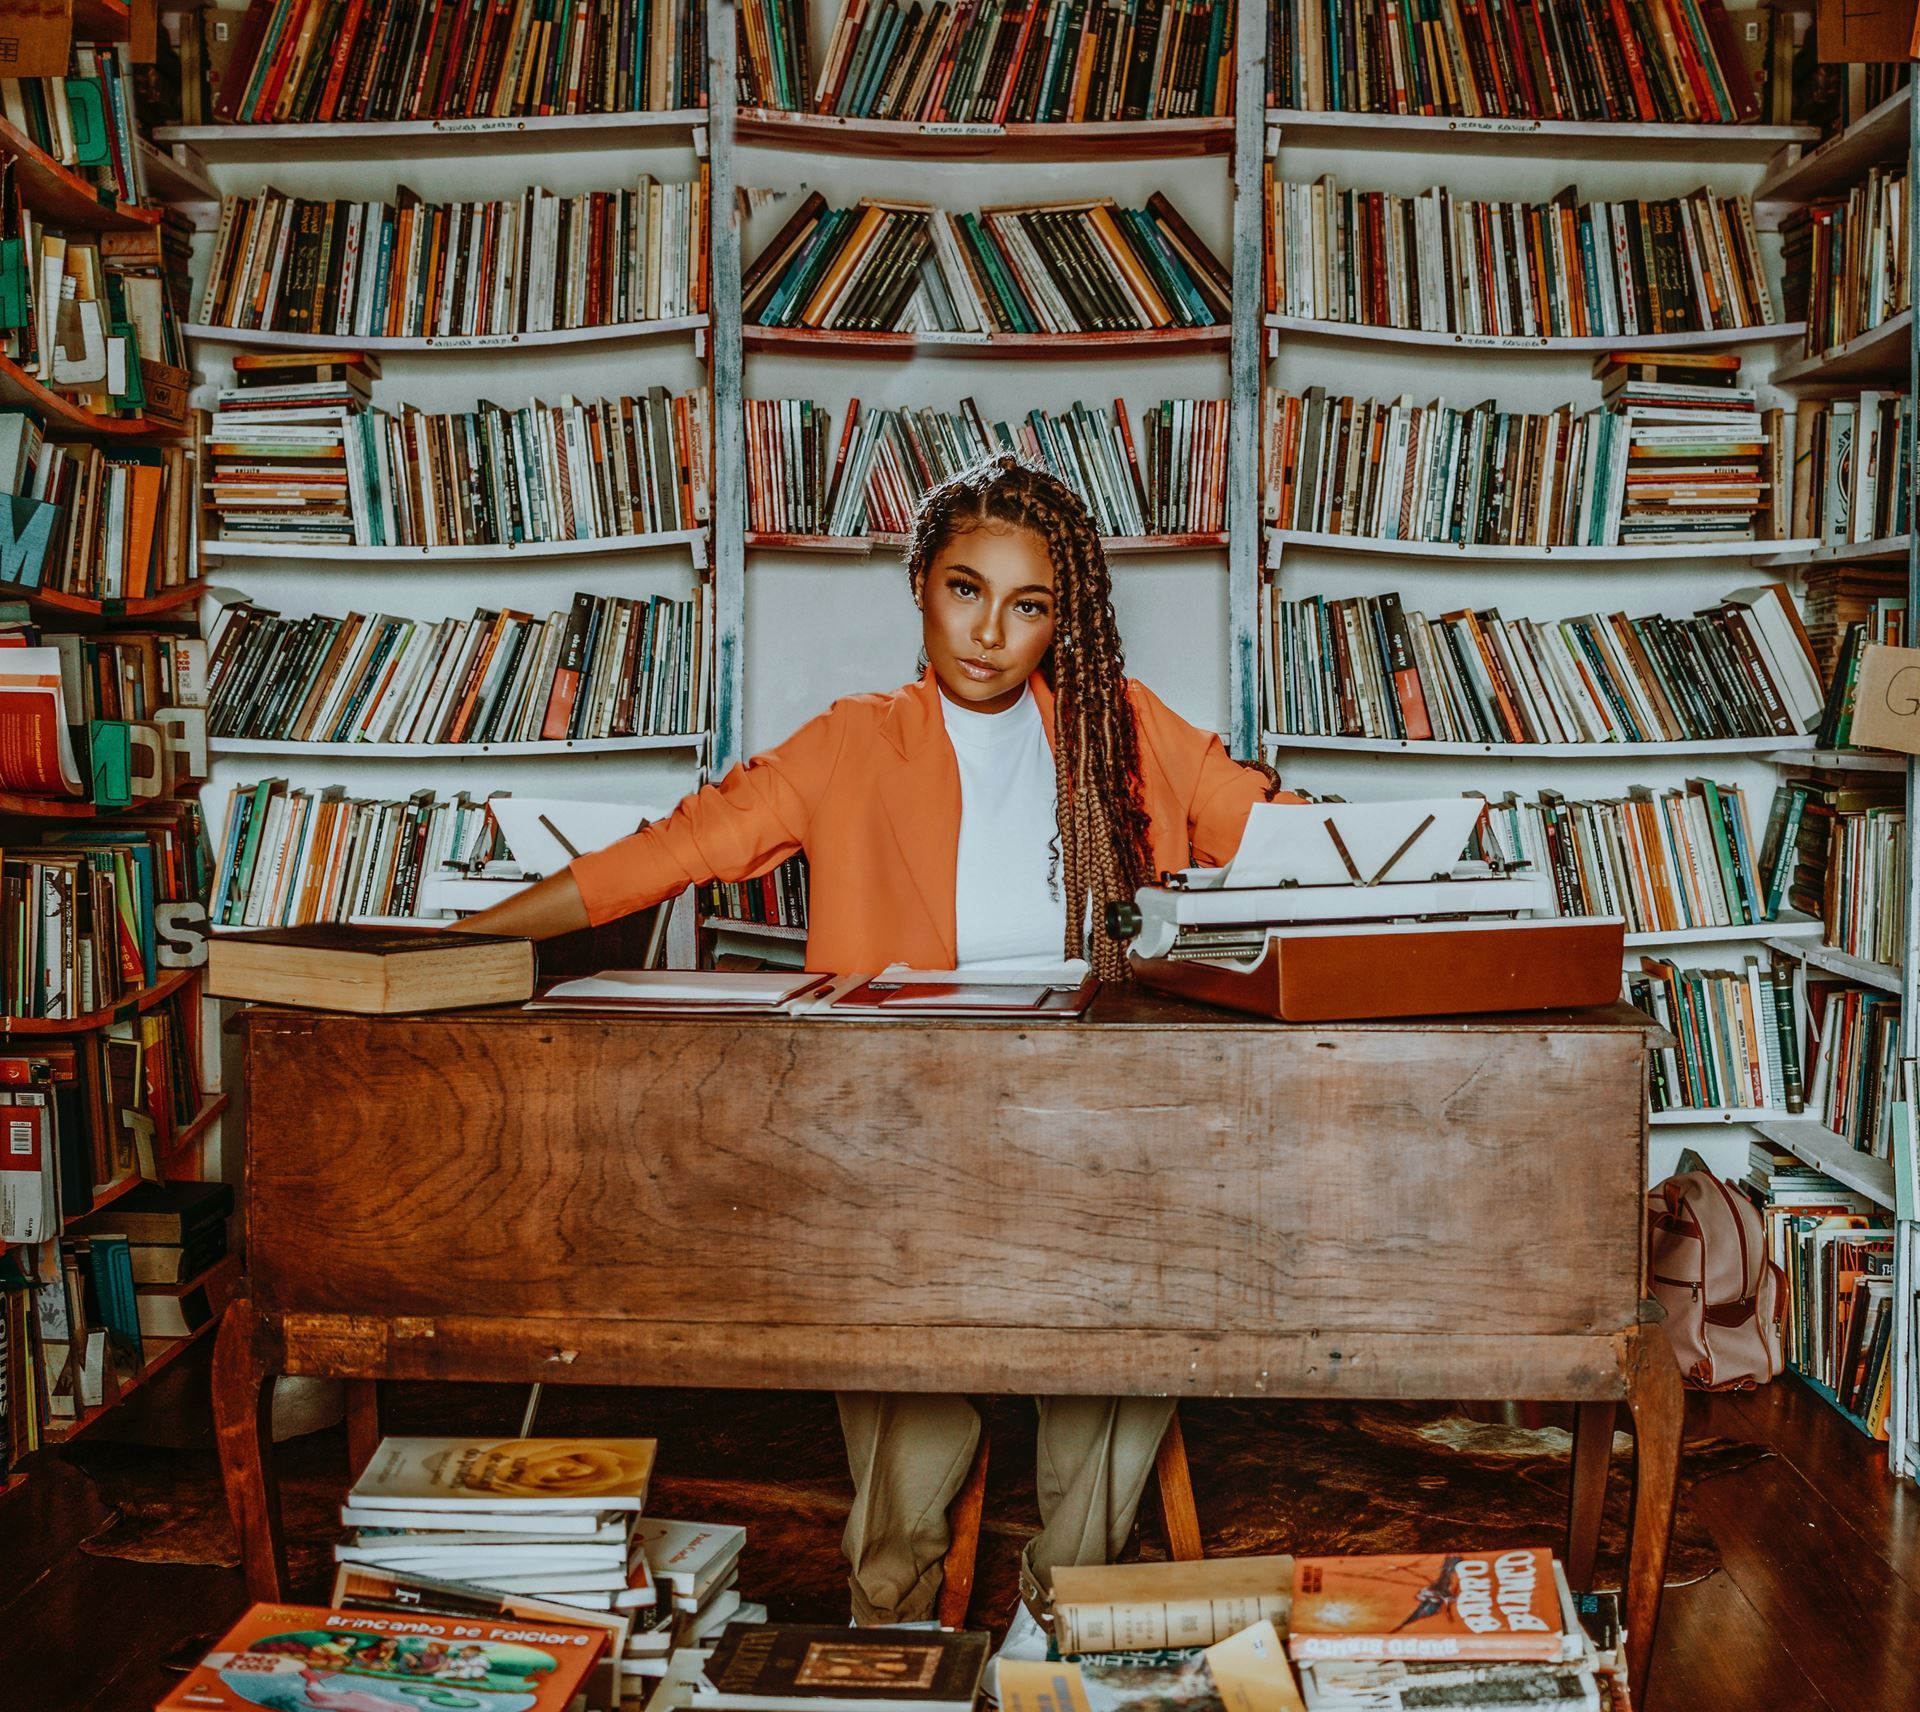 Black woman sitting at desk surrounded by shelves of books.